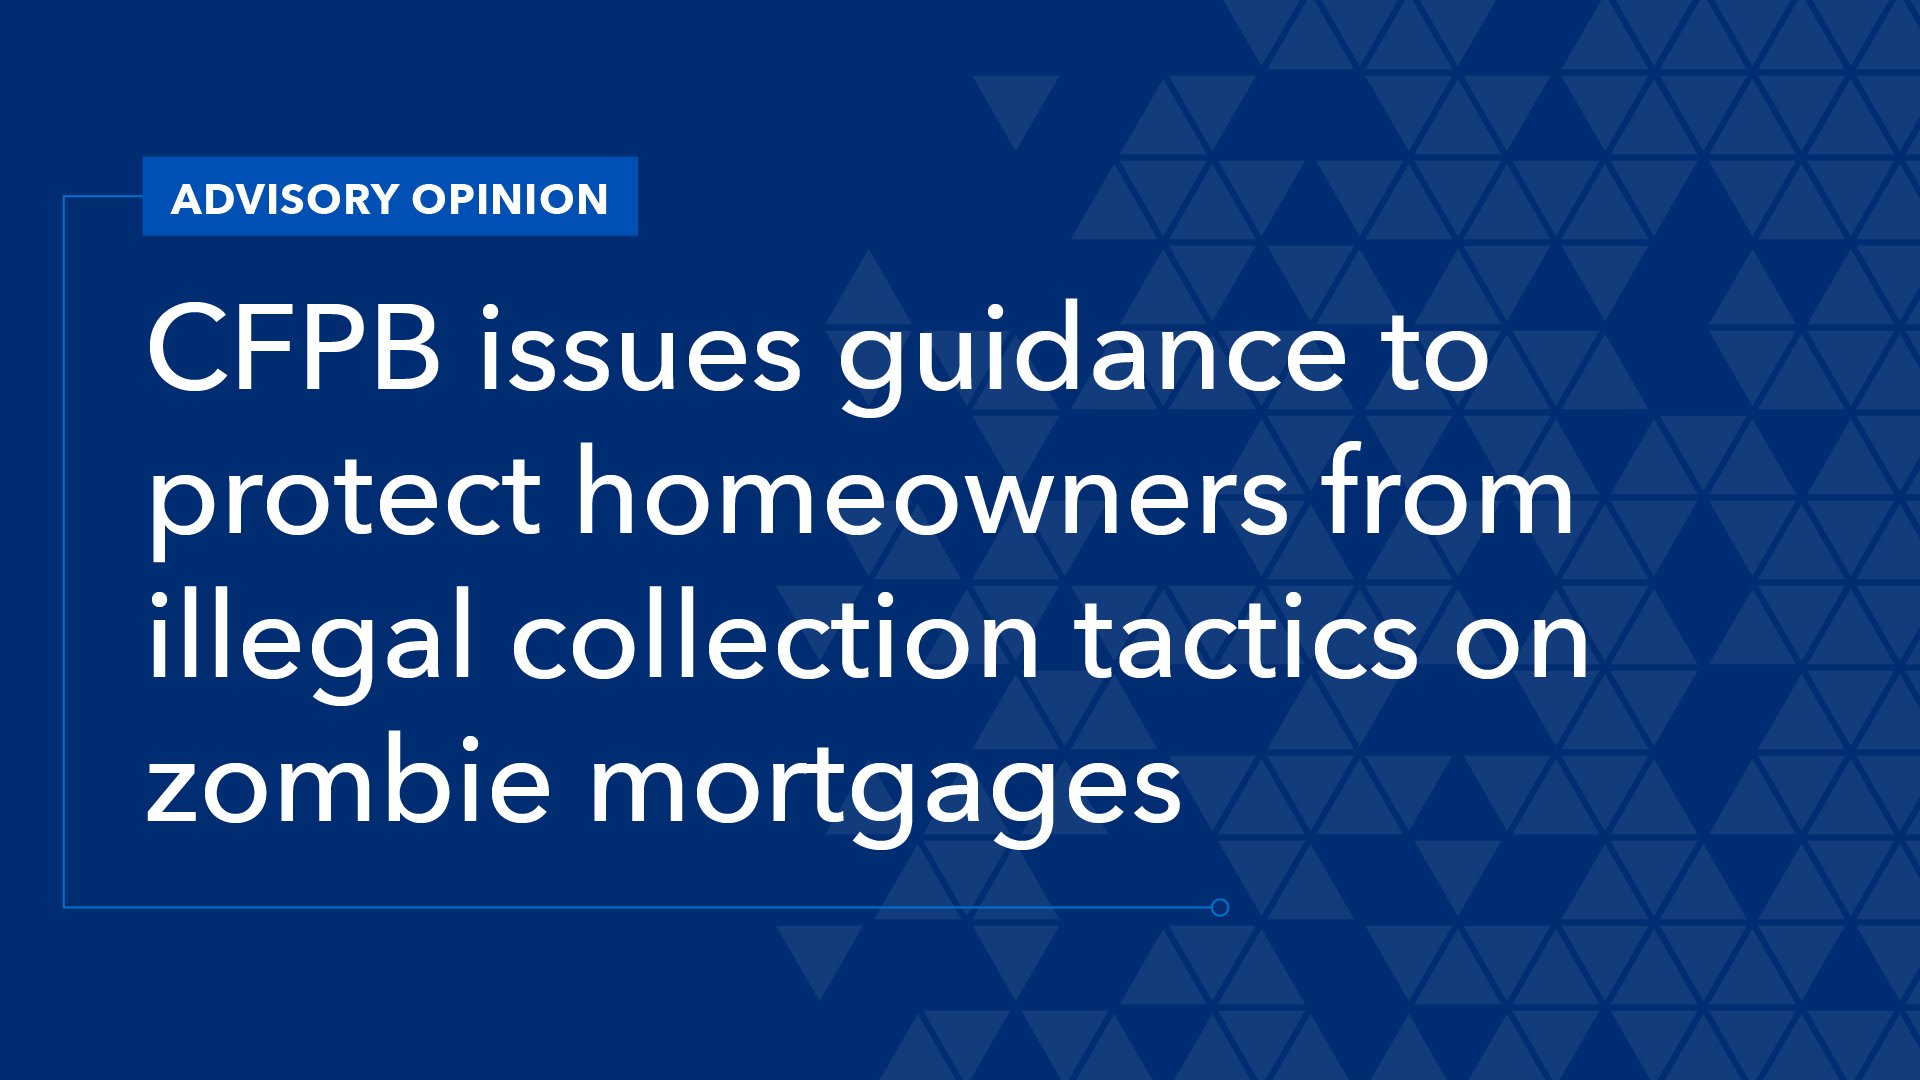 CFPB Issues Guidance to Protect Homeowners from Illegal Collection Tactics on Zombie Mortgages